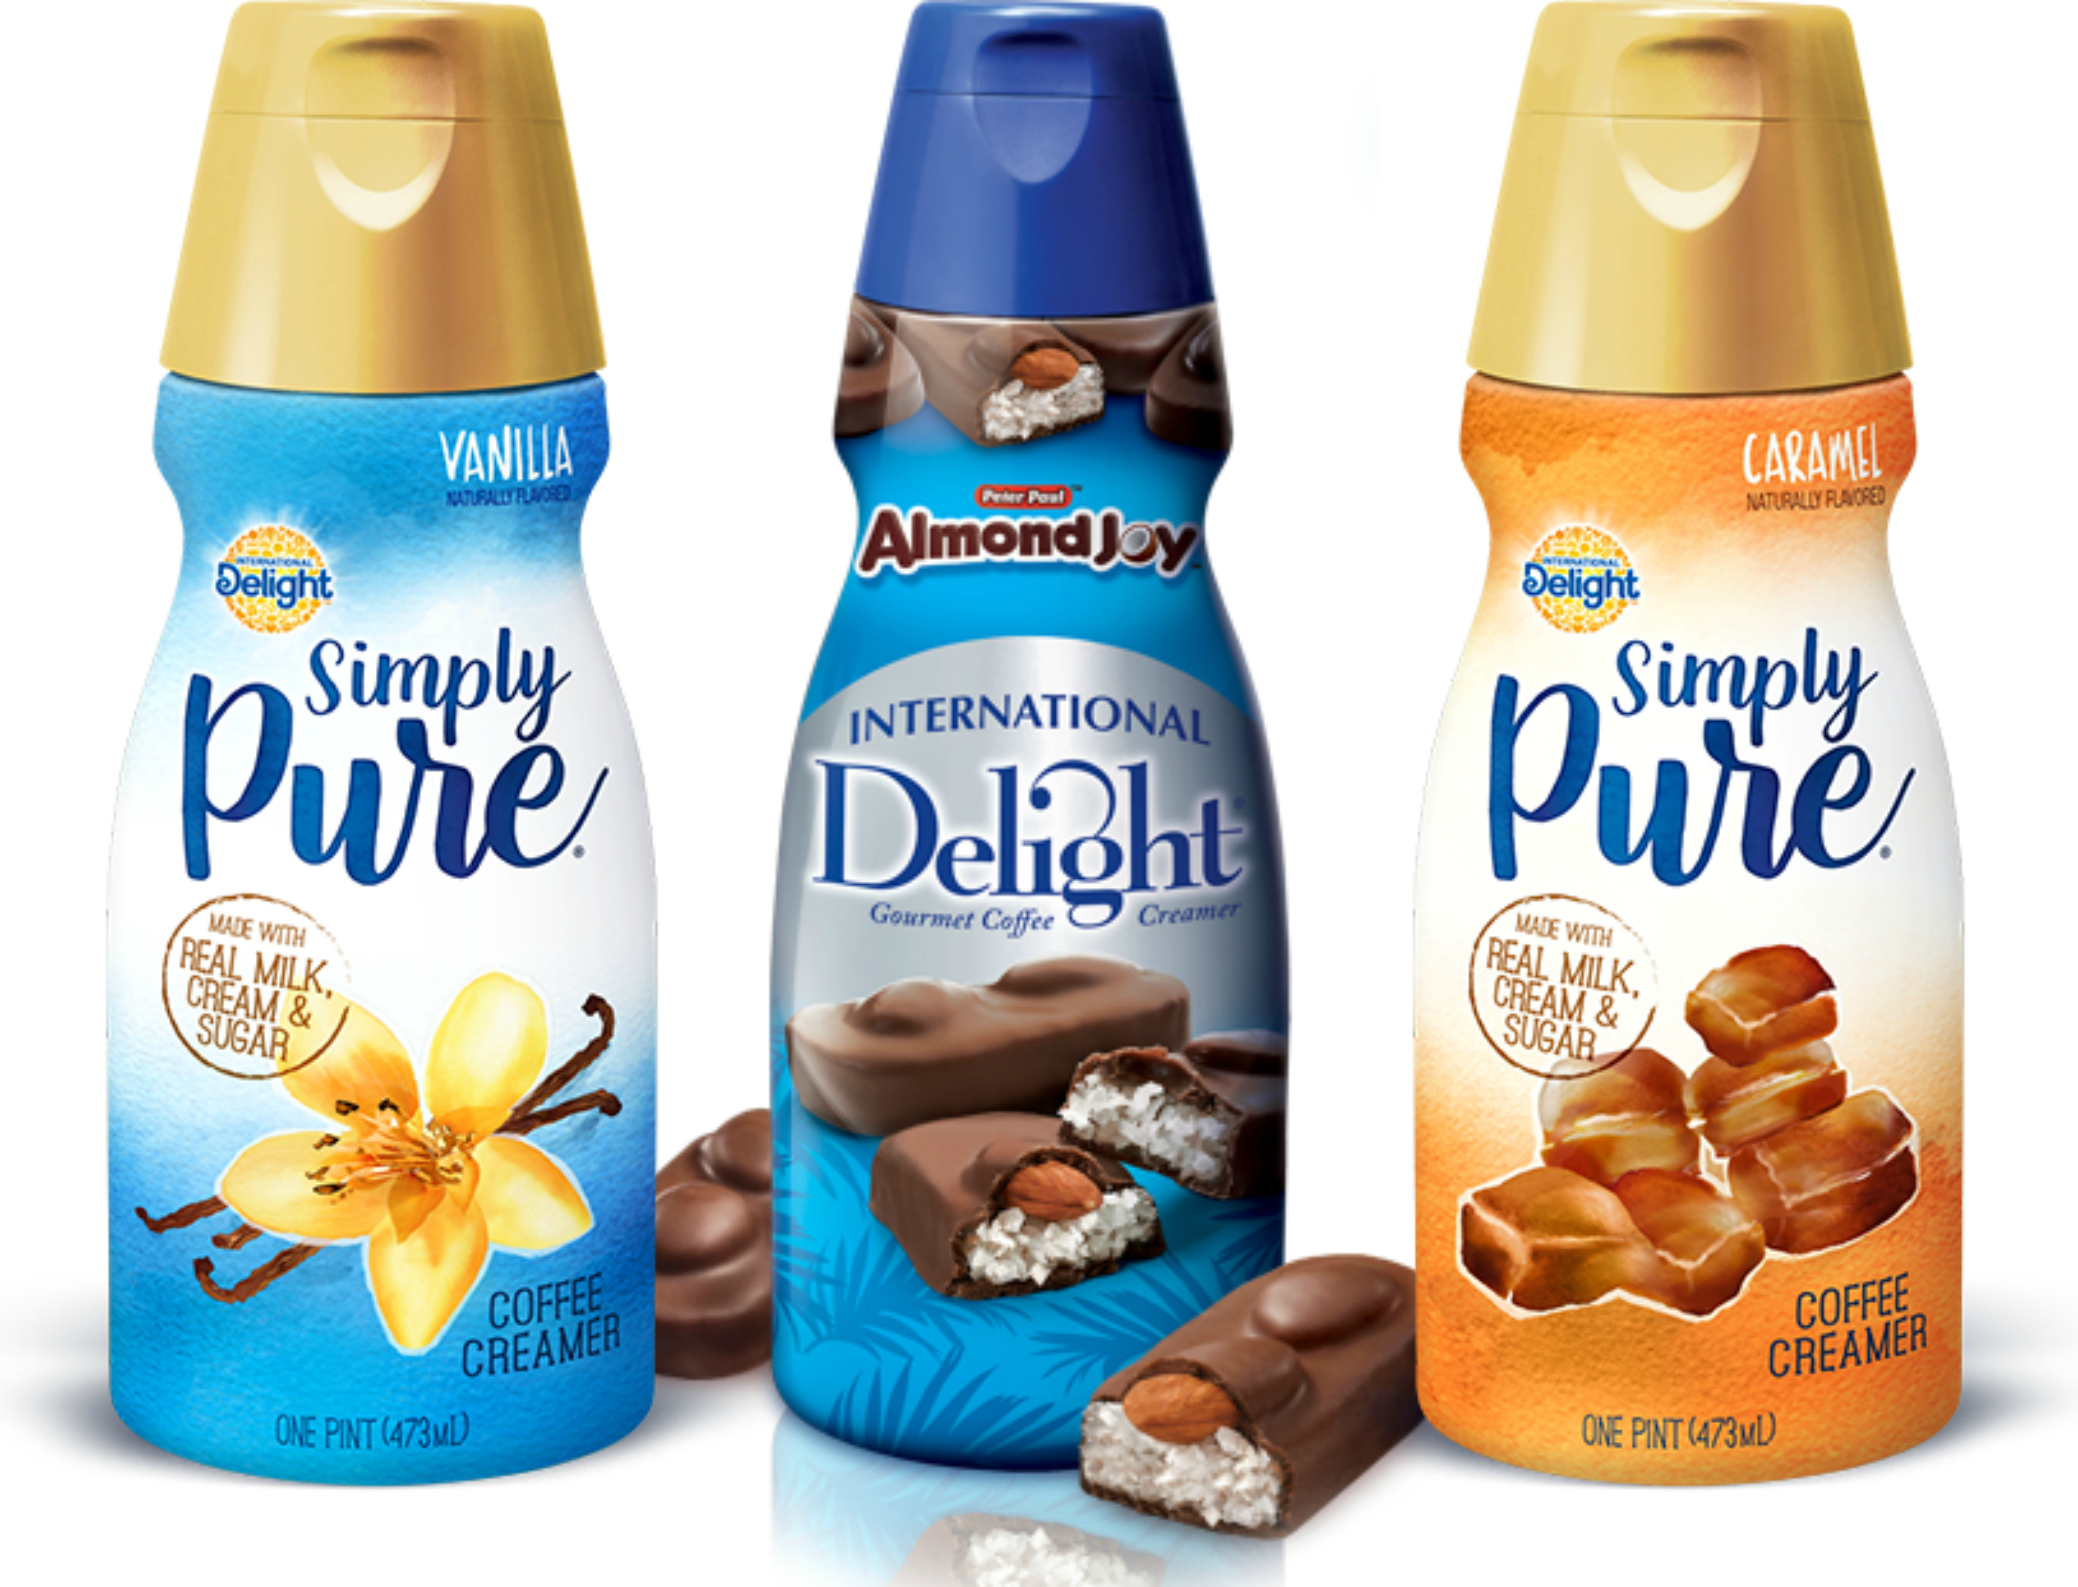 2 New International Delight Creamer Coupons * Hip2Save.